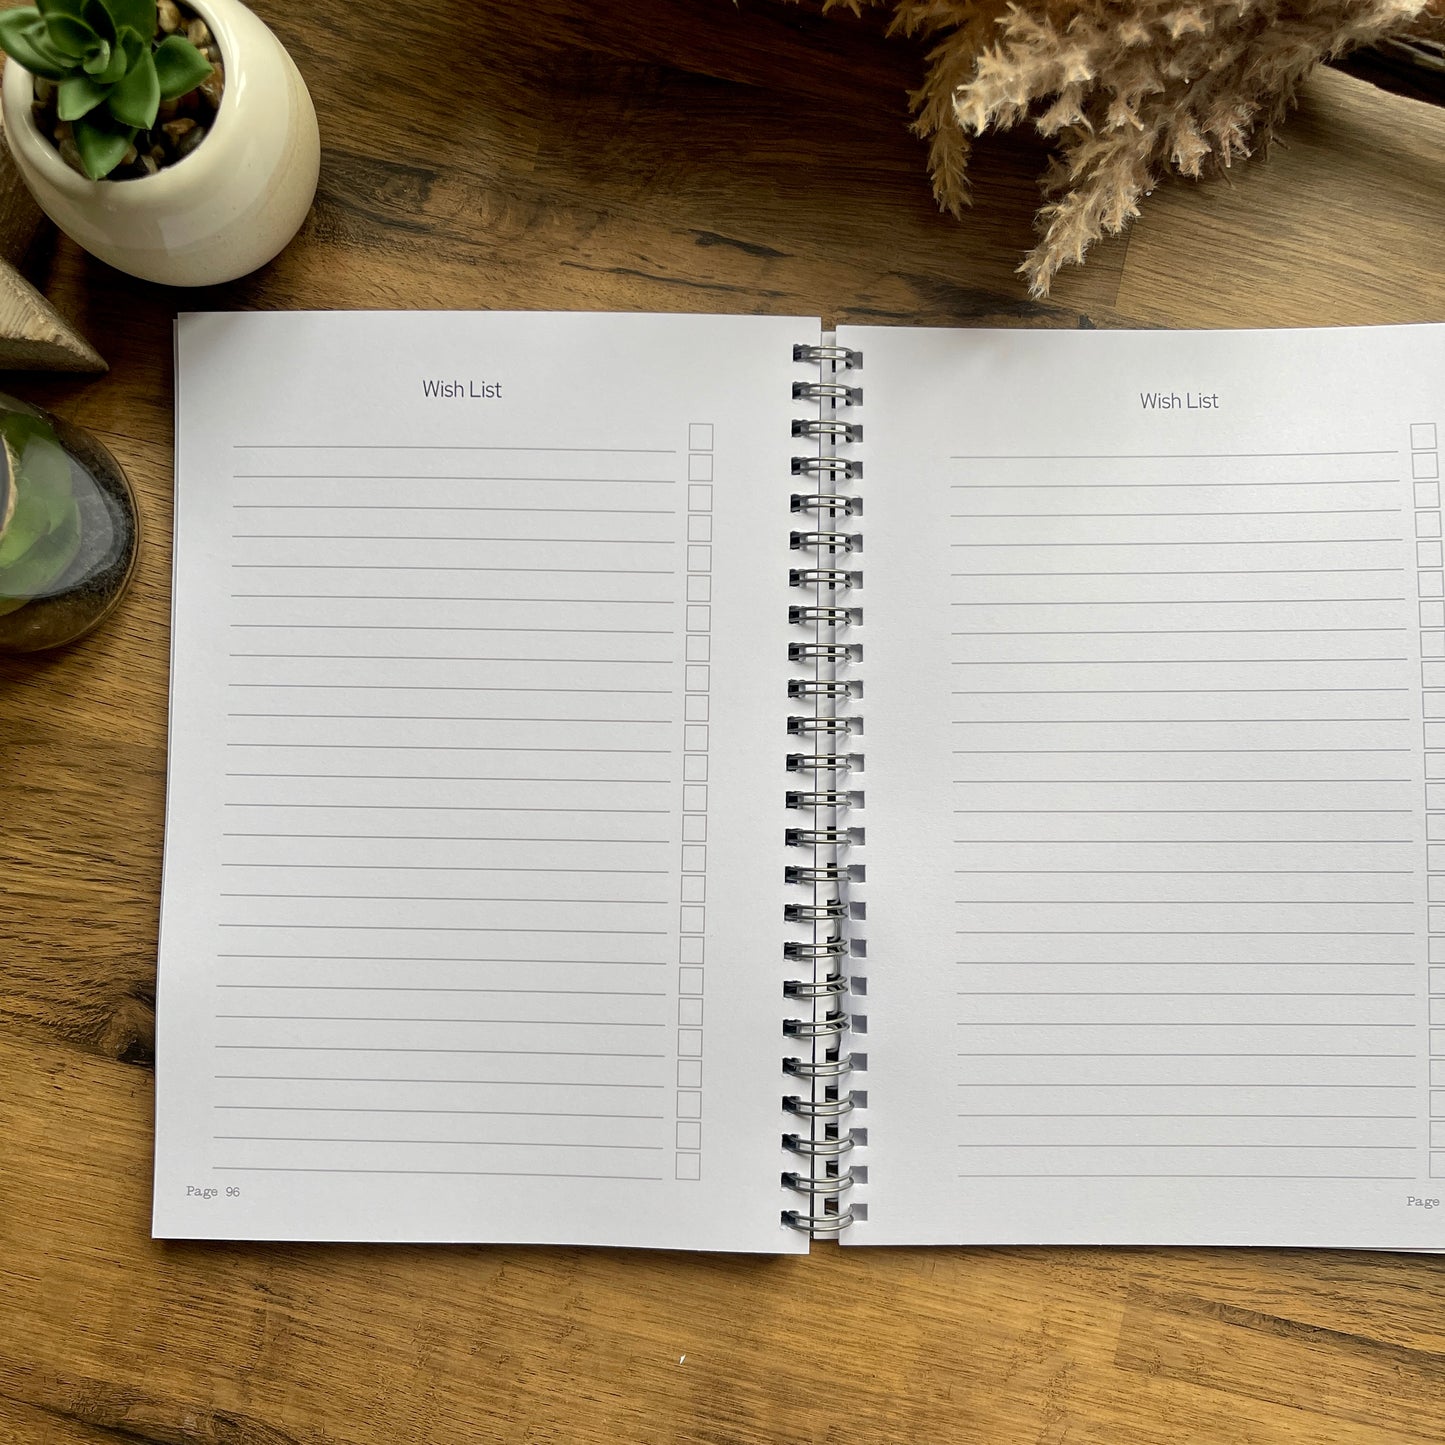 Book Journal - 100 Reviews Wiro bound A5 Reading Tracker